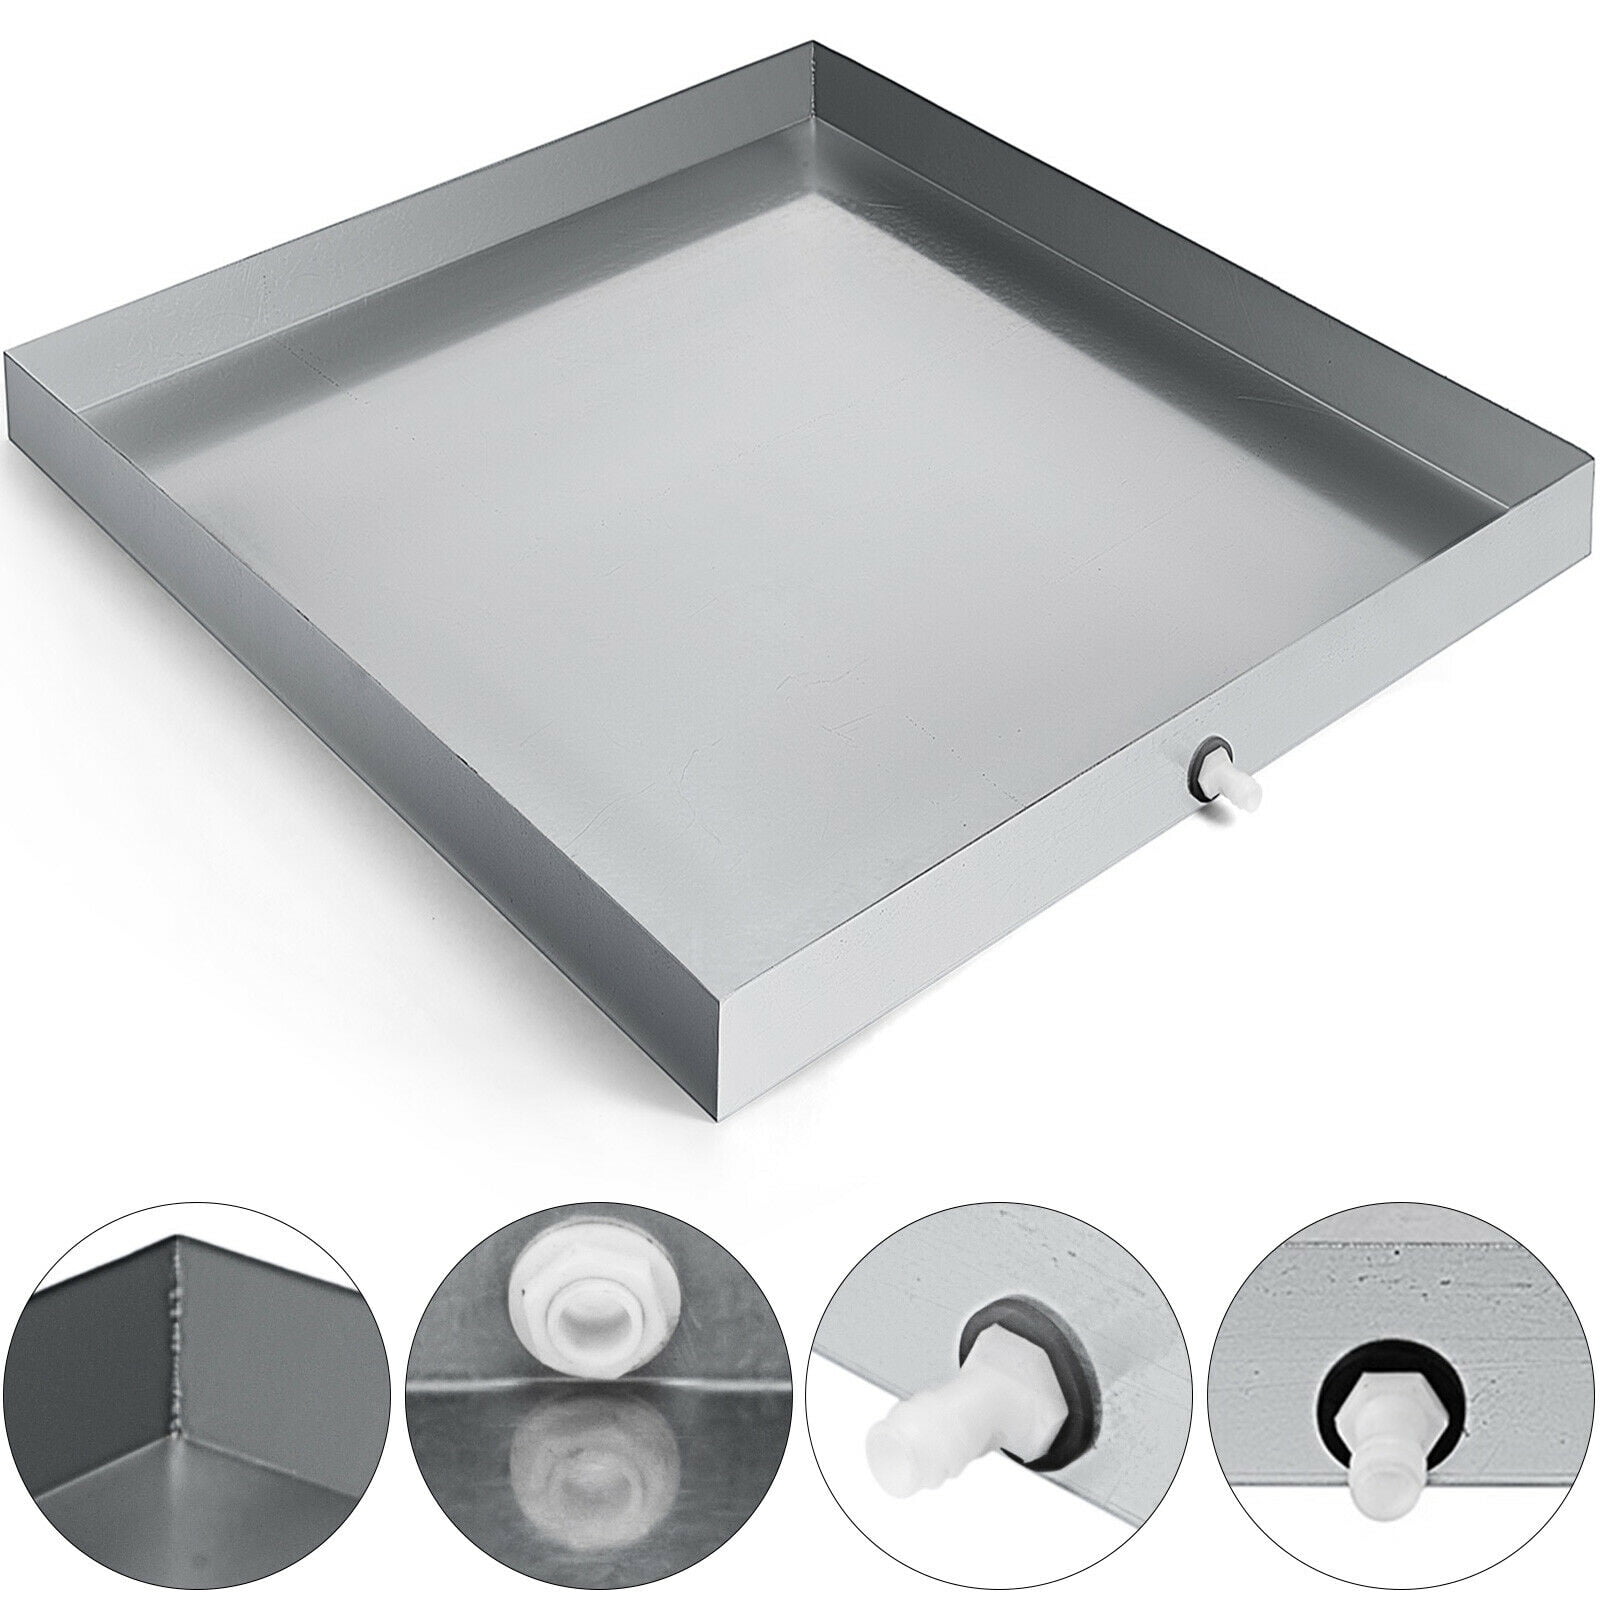 VEVOR 27 in. x 25 in. x 2.5 in. Washing Machine Pan 18-Gauge Thick  Stainless Steel Compact Washer Drip Tray w/ Hose Adapter  SC27X25X2.5YC0001V0 - The Home Depot